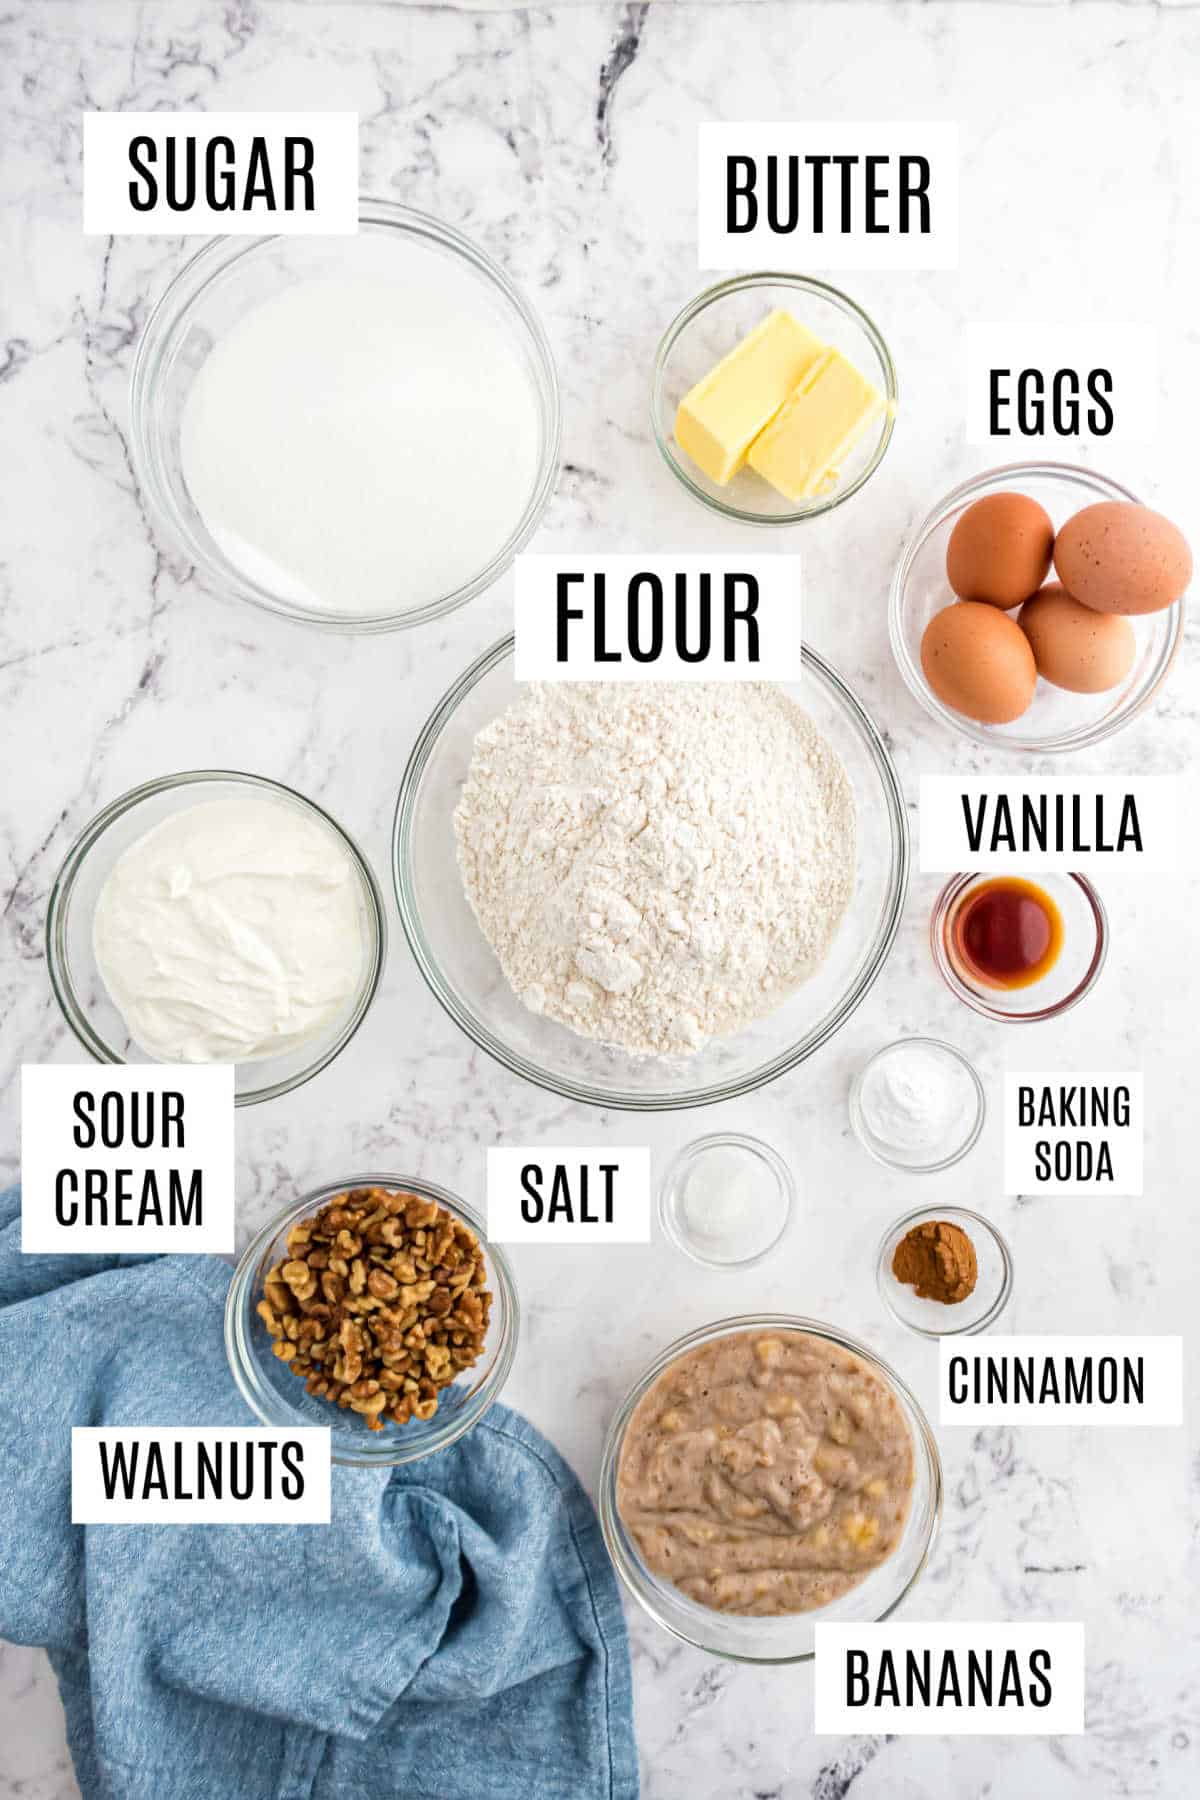 Ingredients needed to make banana nut muffins.